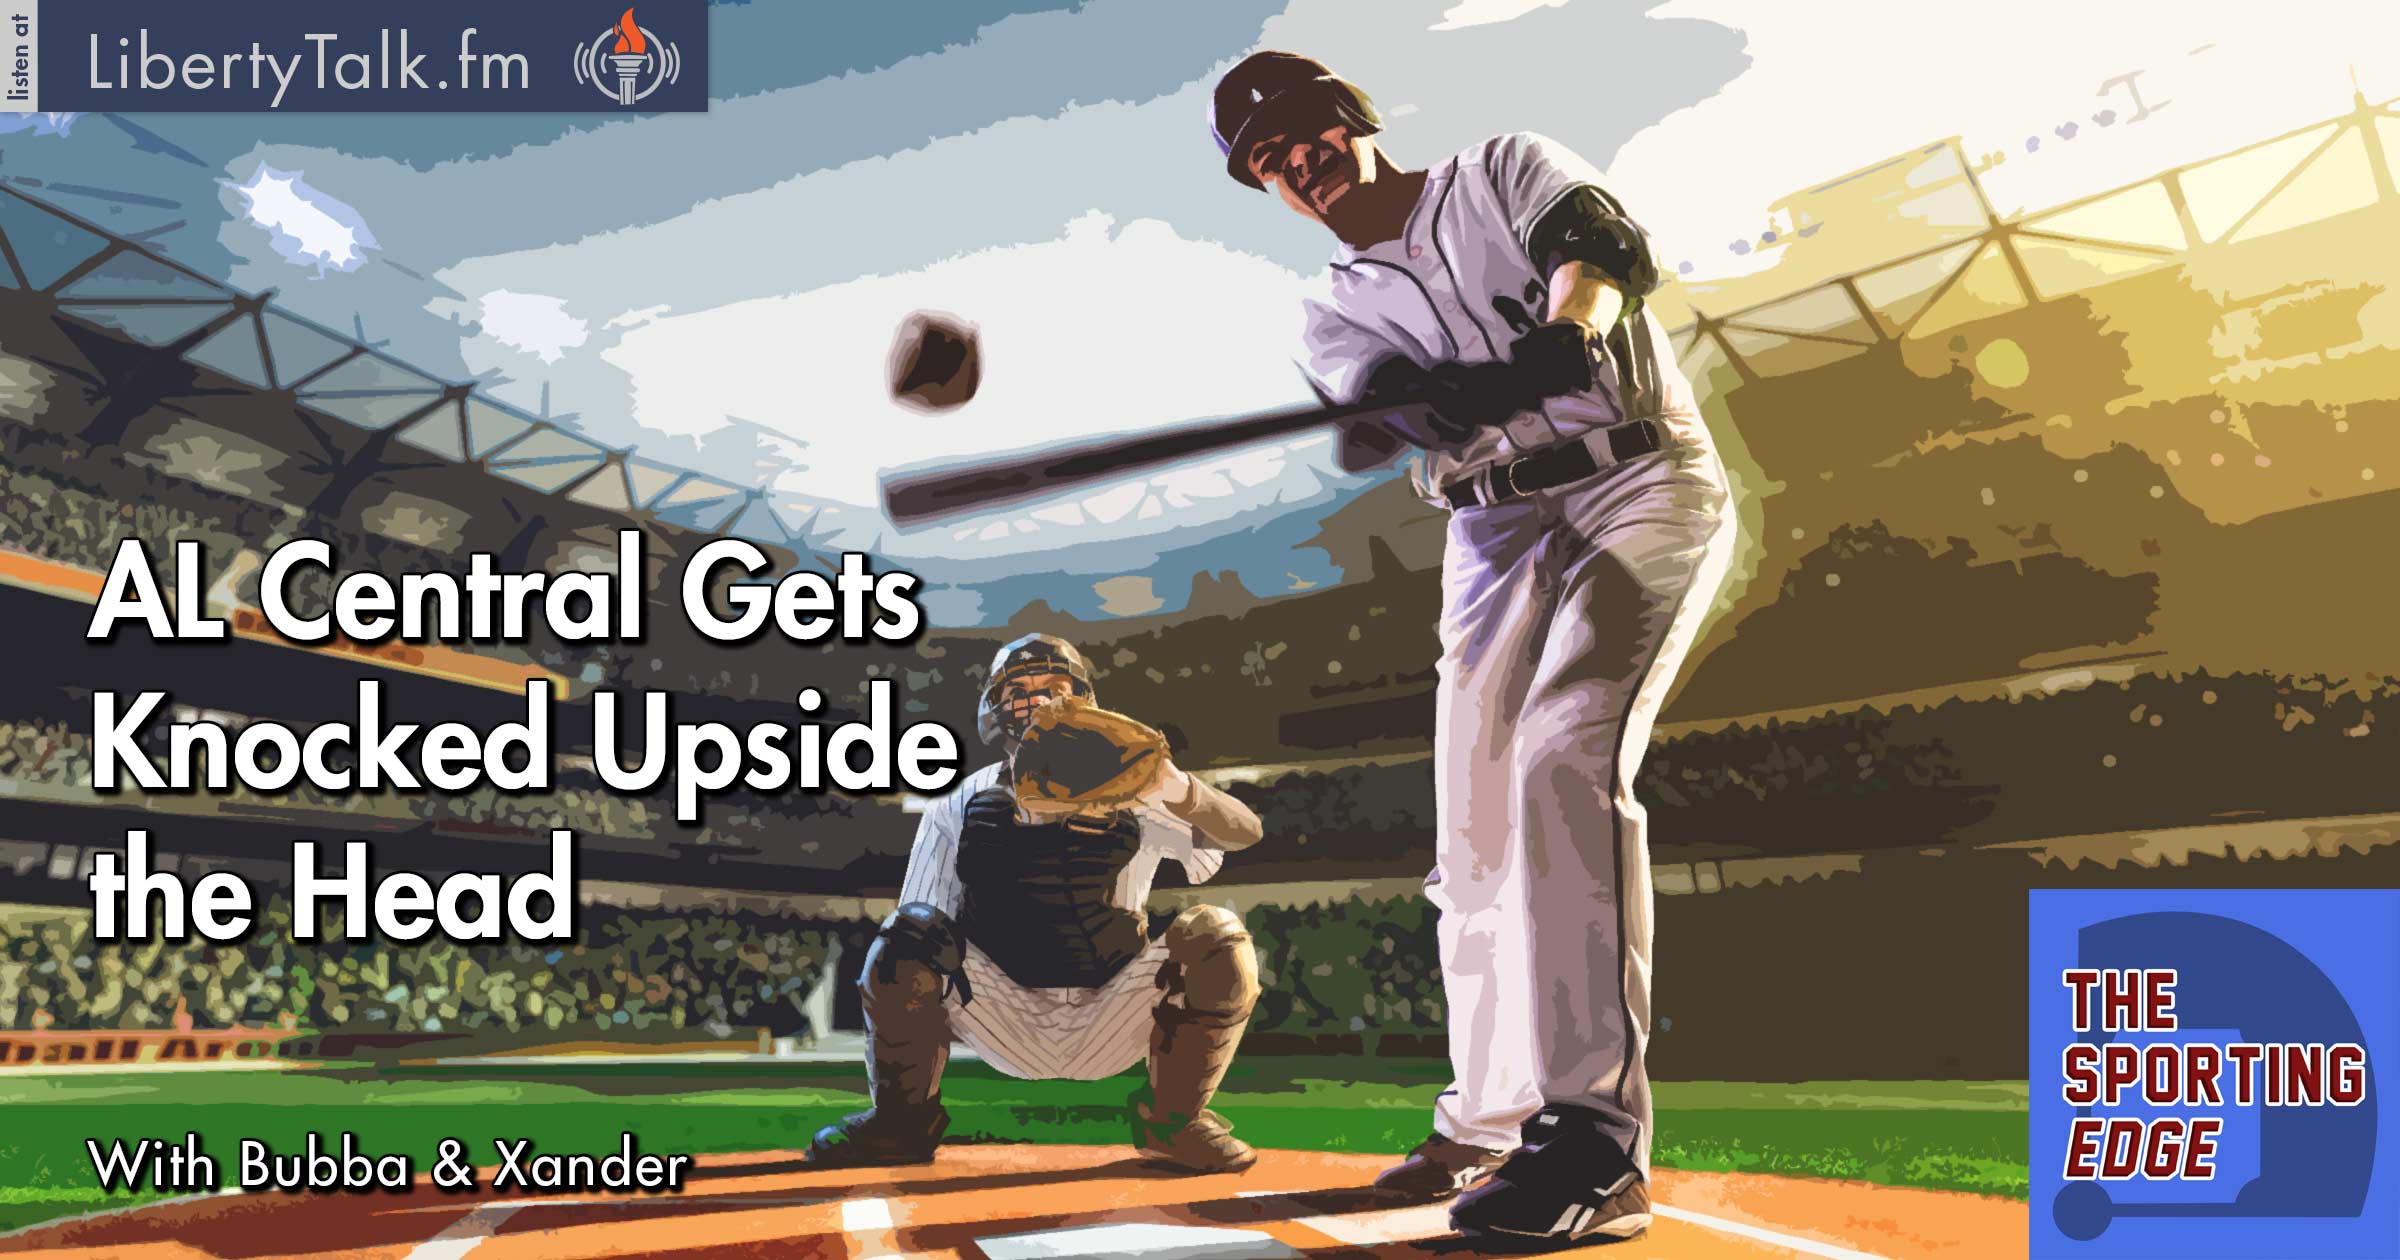 AL Central Gets Knocked Upside the Head - The Sporting Edge